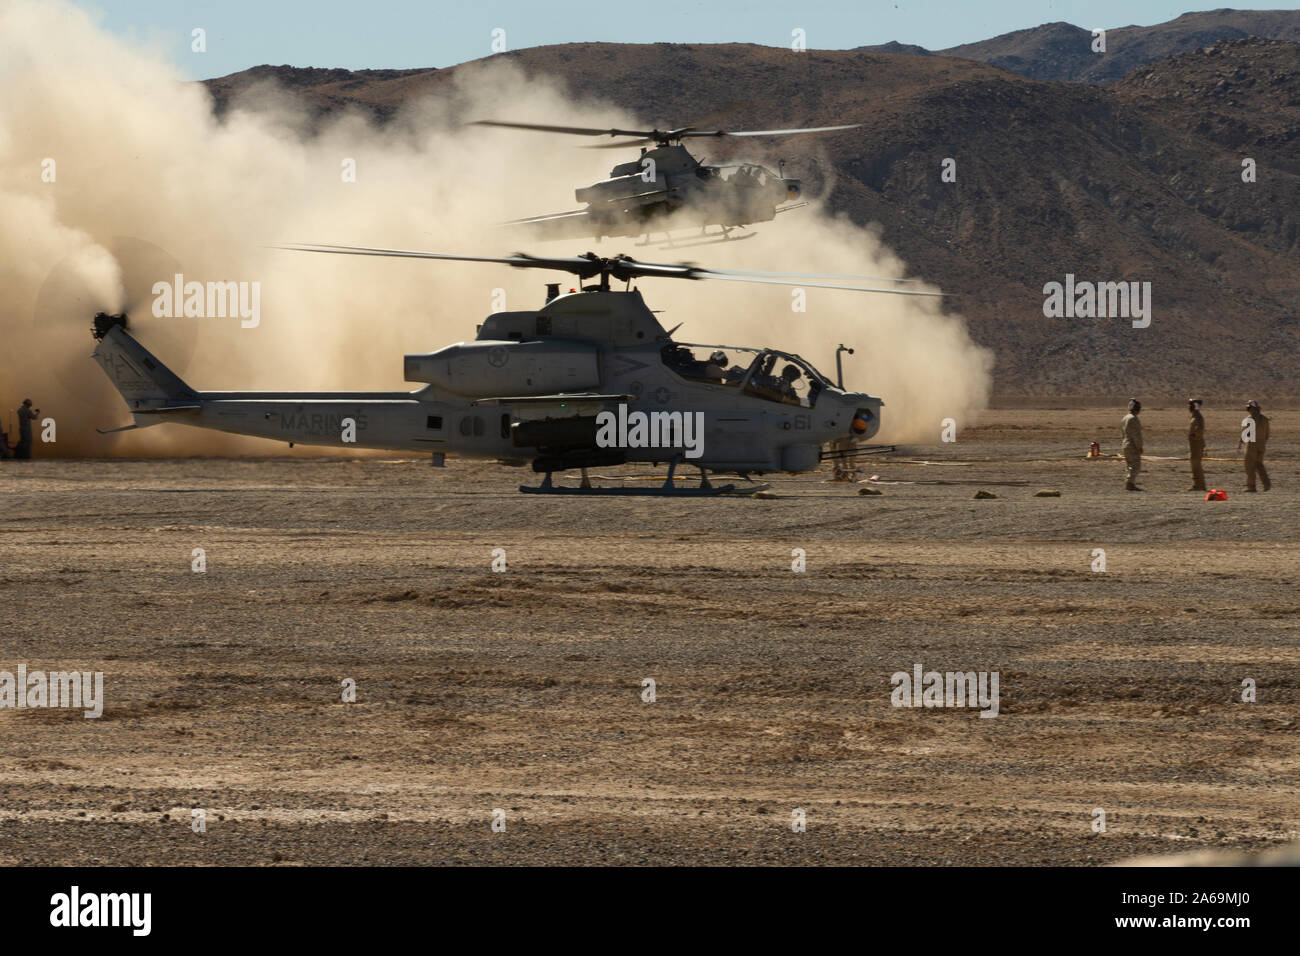 U.S. Marine Corps AH-1Z Viper helicopters with the Marine Light Attack Helicopter Squadron (HMLA) 269, 2nd Marine Aircraft Wing land during a training event at Marine Corps Air Ground Combat Center, Twentynine Palms, California, Oct. 23, 2019. The training simulated an effective approach on conducting a logistical restock in a combat zone. HMLA-269 will be supporting the 2nd Marine Division (2d MARDIV) in the execution of the MAGTF Warfighting Exercise (MWX) 1-20. MWX is set to be the largest exercise conducted by the 2d MARDIV in several decades. (U.S. Marine Corps photo by Pfc. Patrick King) Stock Photo